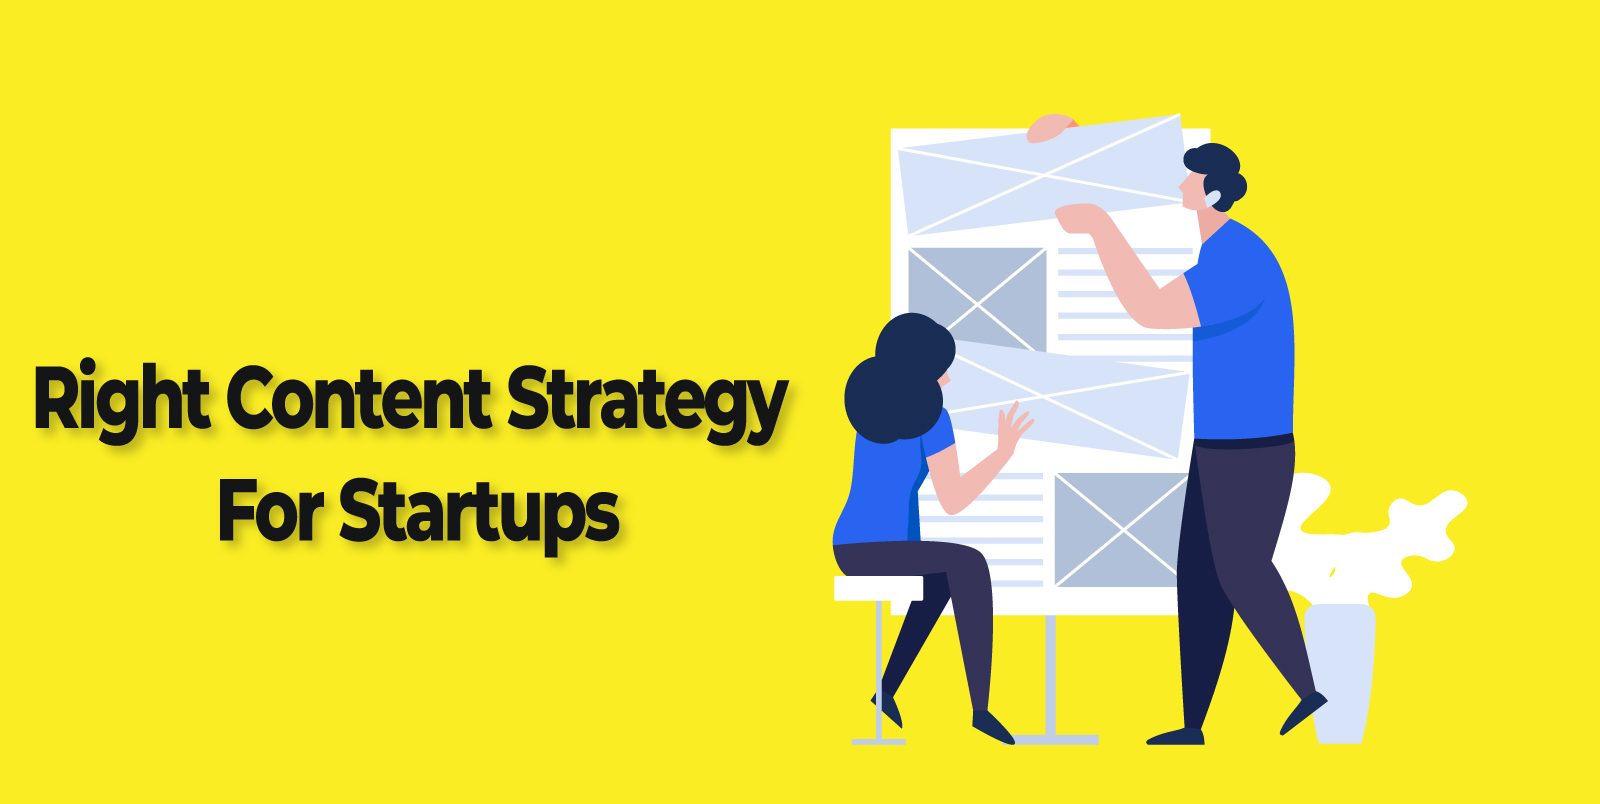 Right Content Strategy For Startups- A Step-By-Step Guide